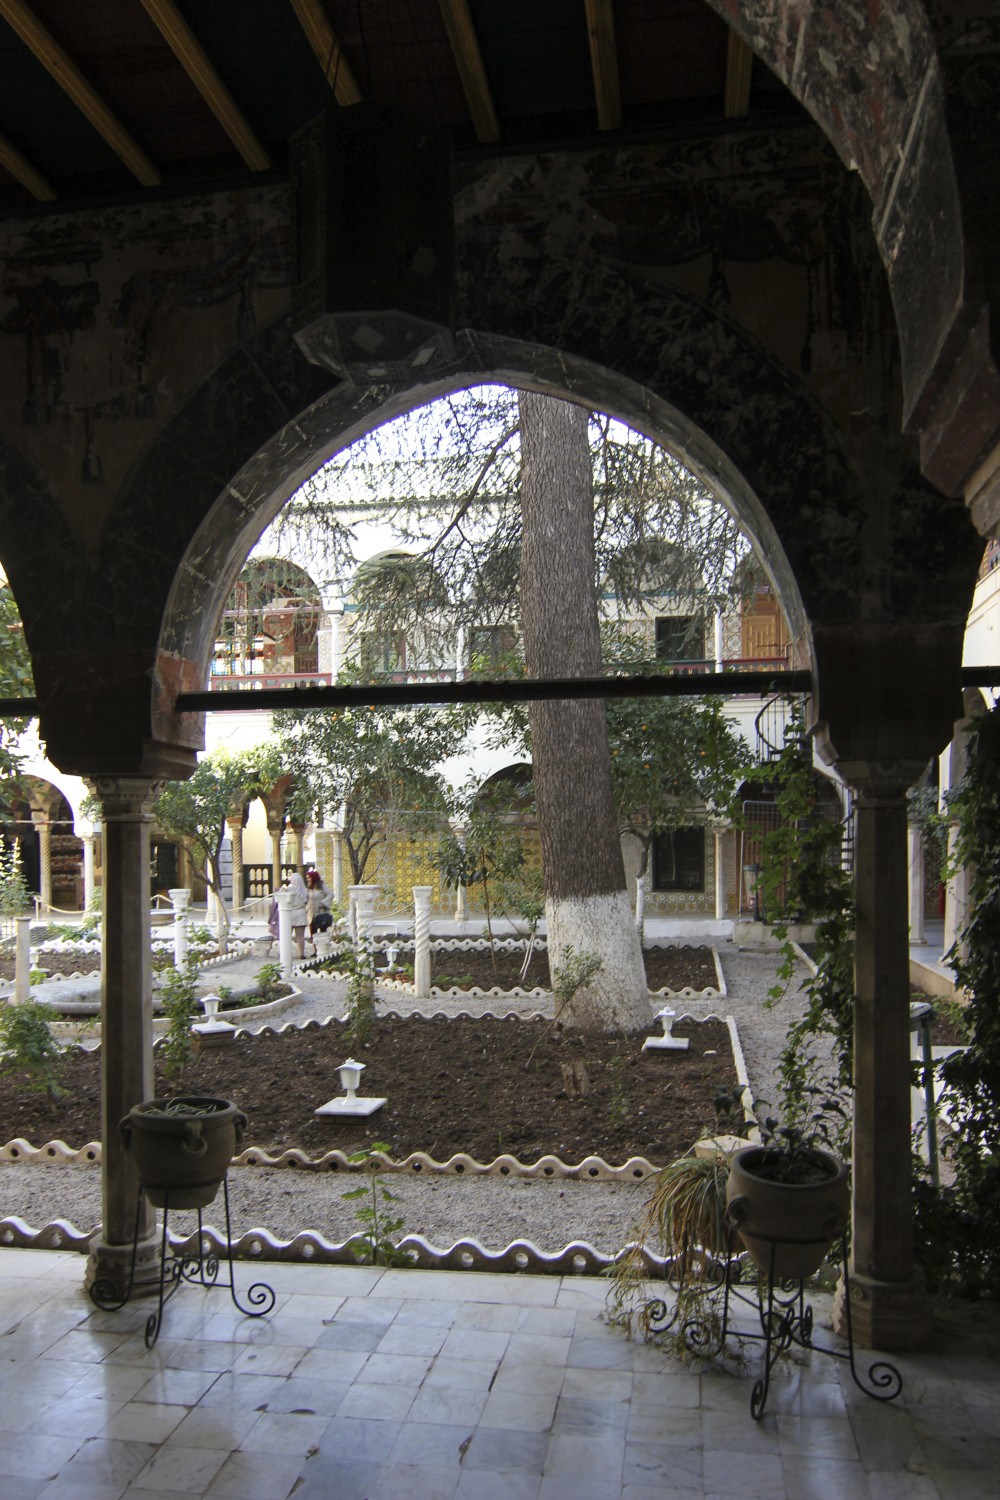 Orange trees garden, west gallery, view of pointed arch supported by baseless slender columns